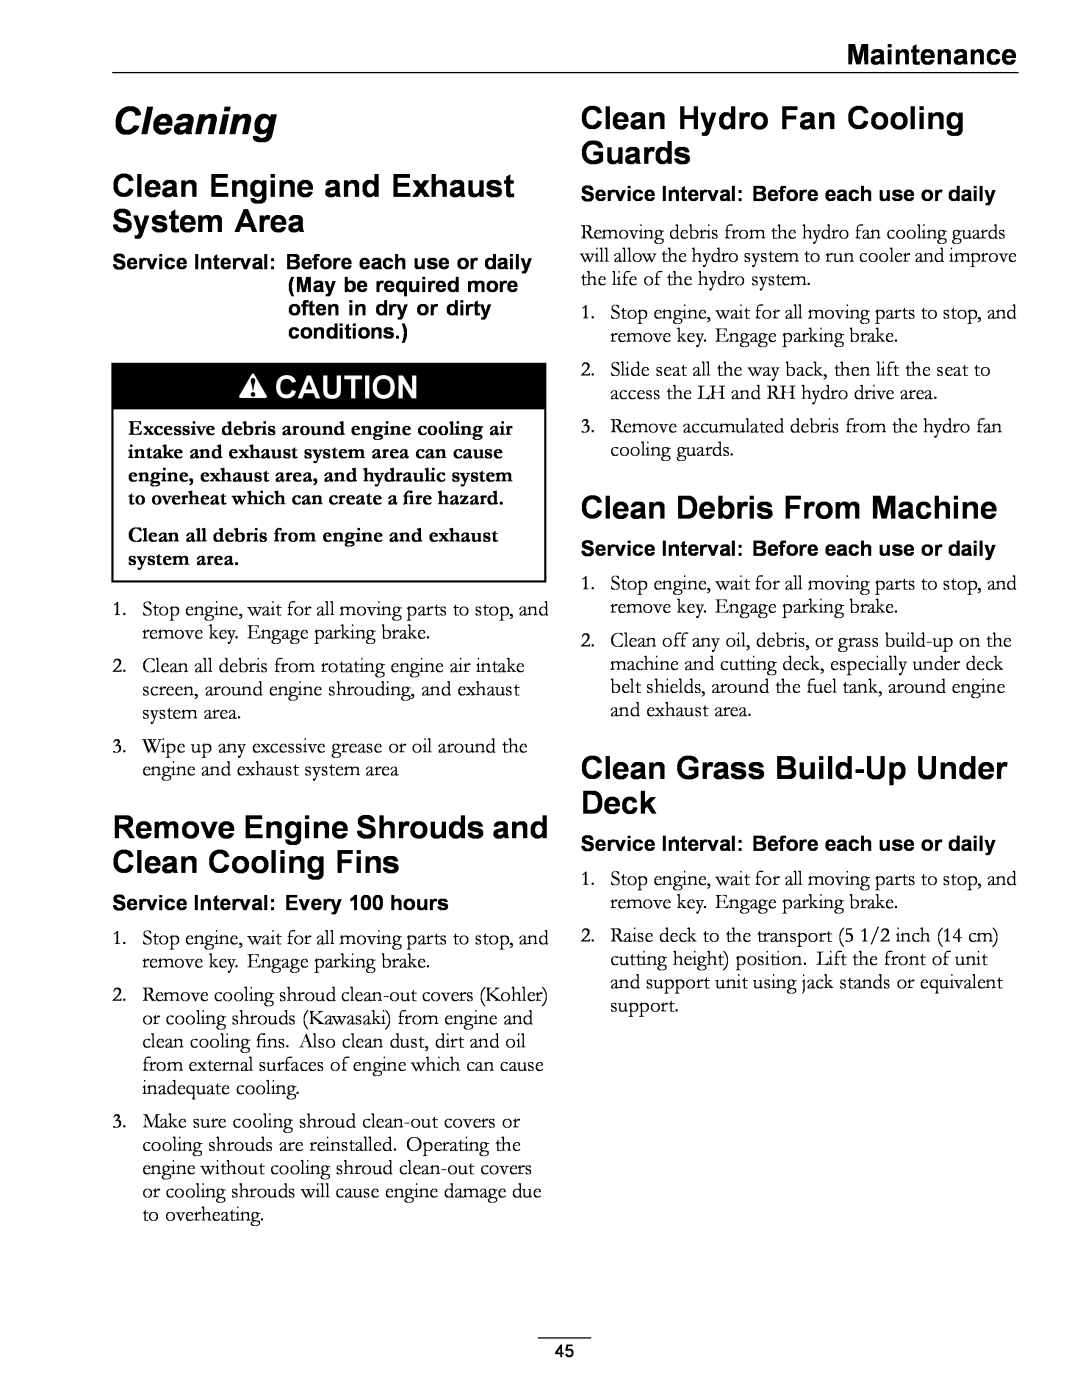 Exmark 4500-507 Cleaning, Clean Engine and Exhaust System Area, Remove Engine Shrouds and Clean Cooling Fins, Maintenance 